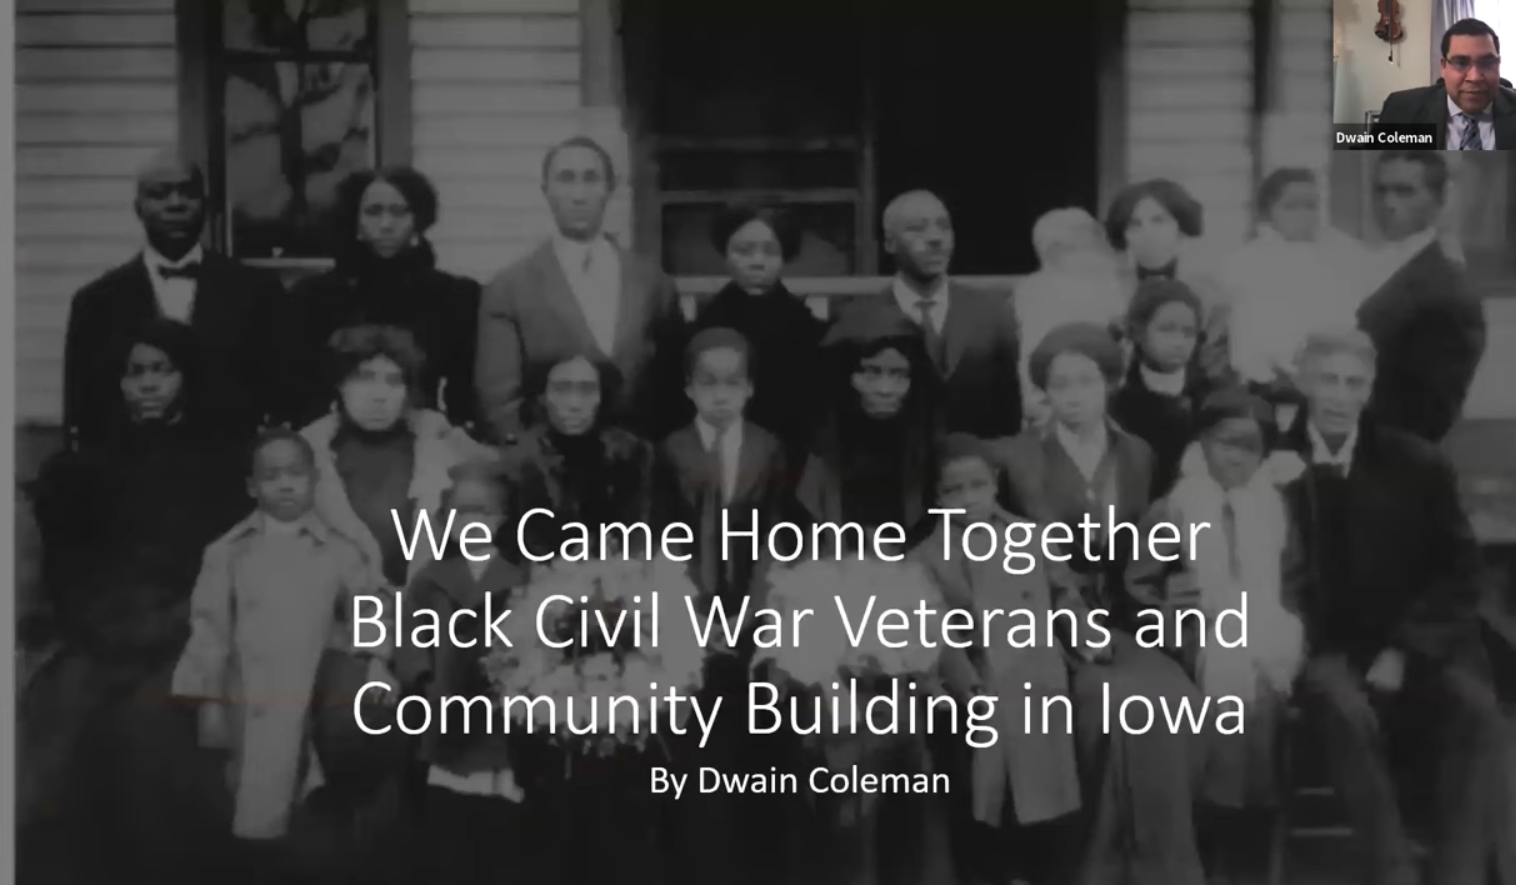 "We Came Home Together": Black Civil War Veterans and Community Building in Iowa